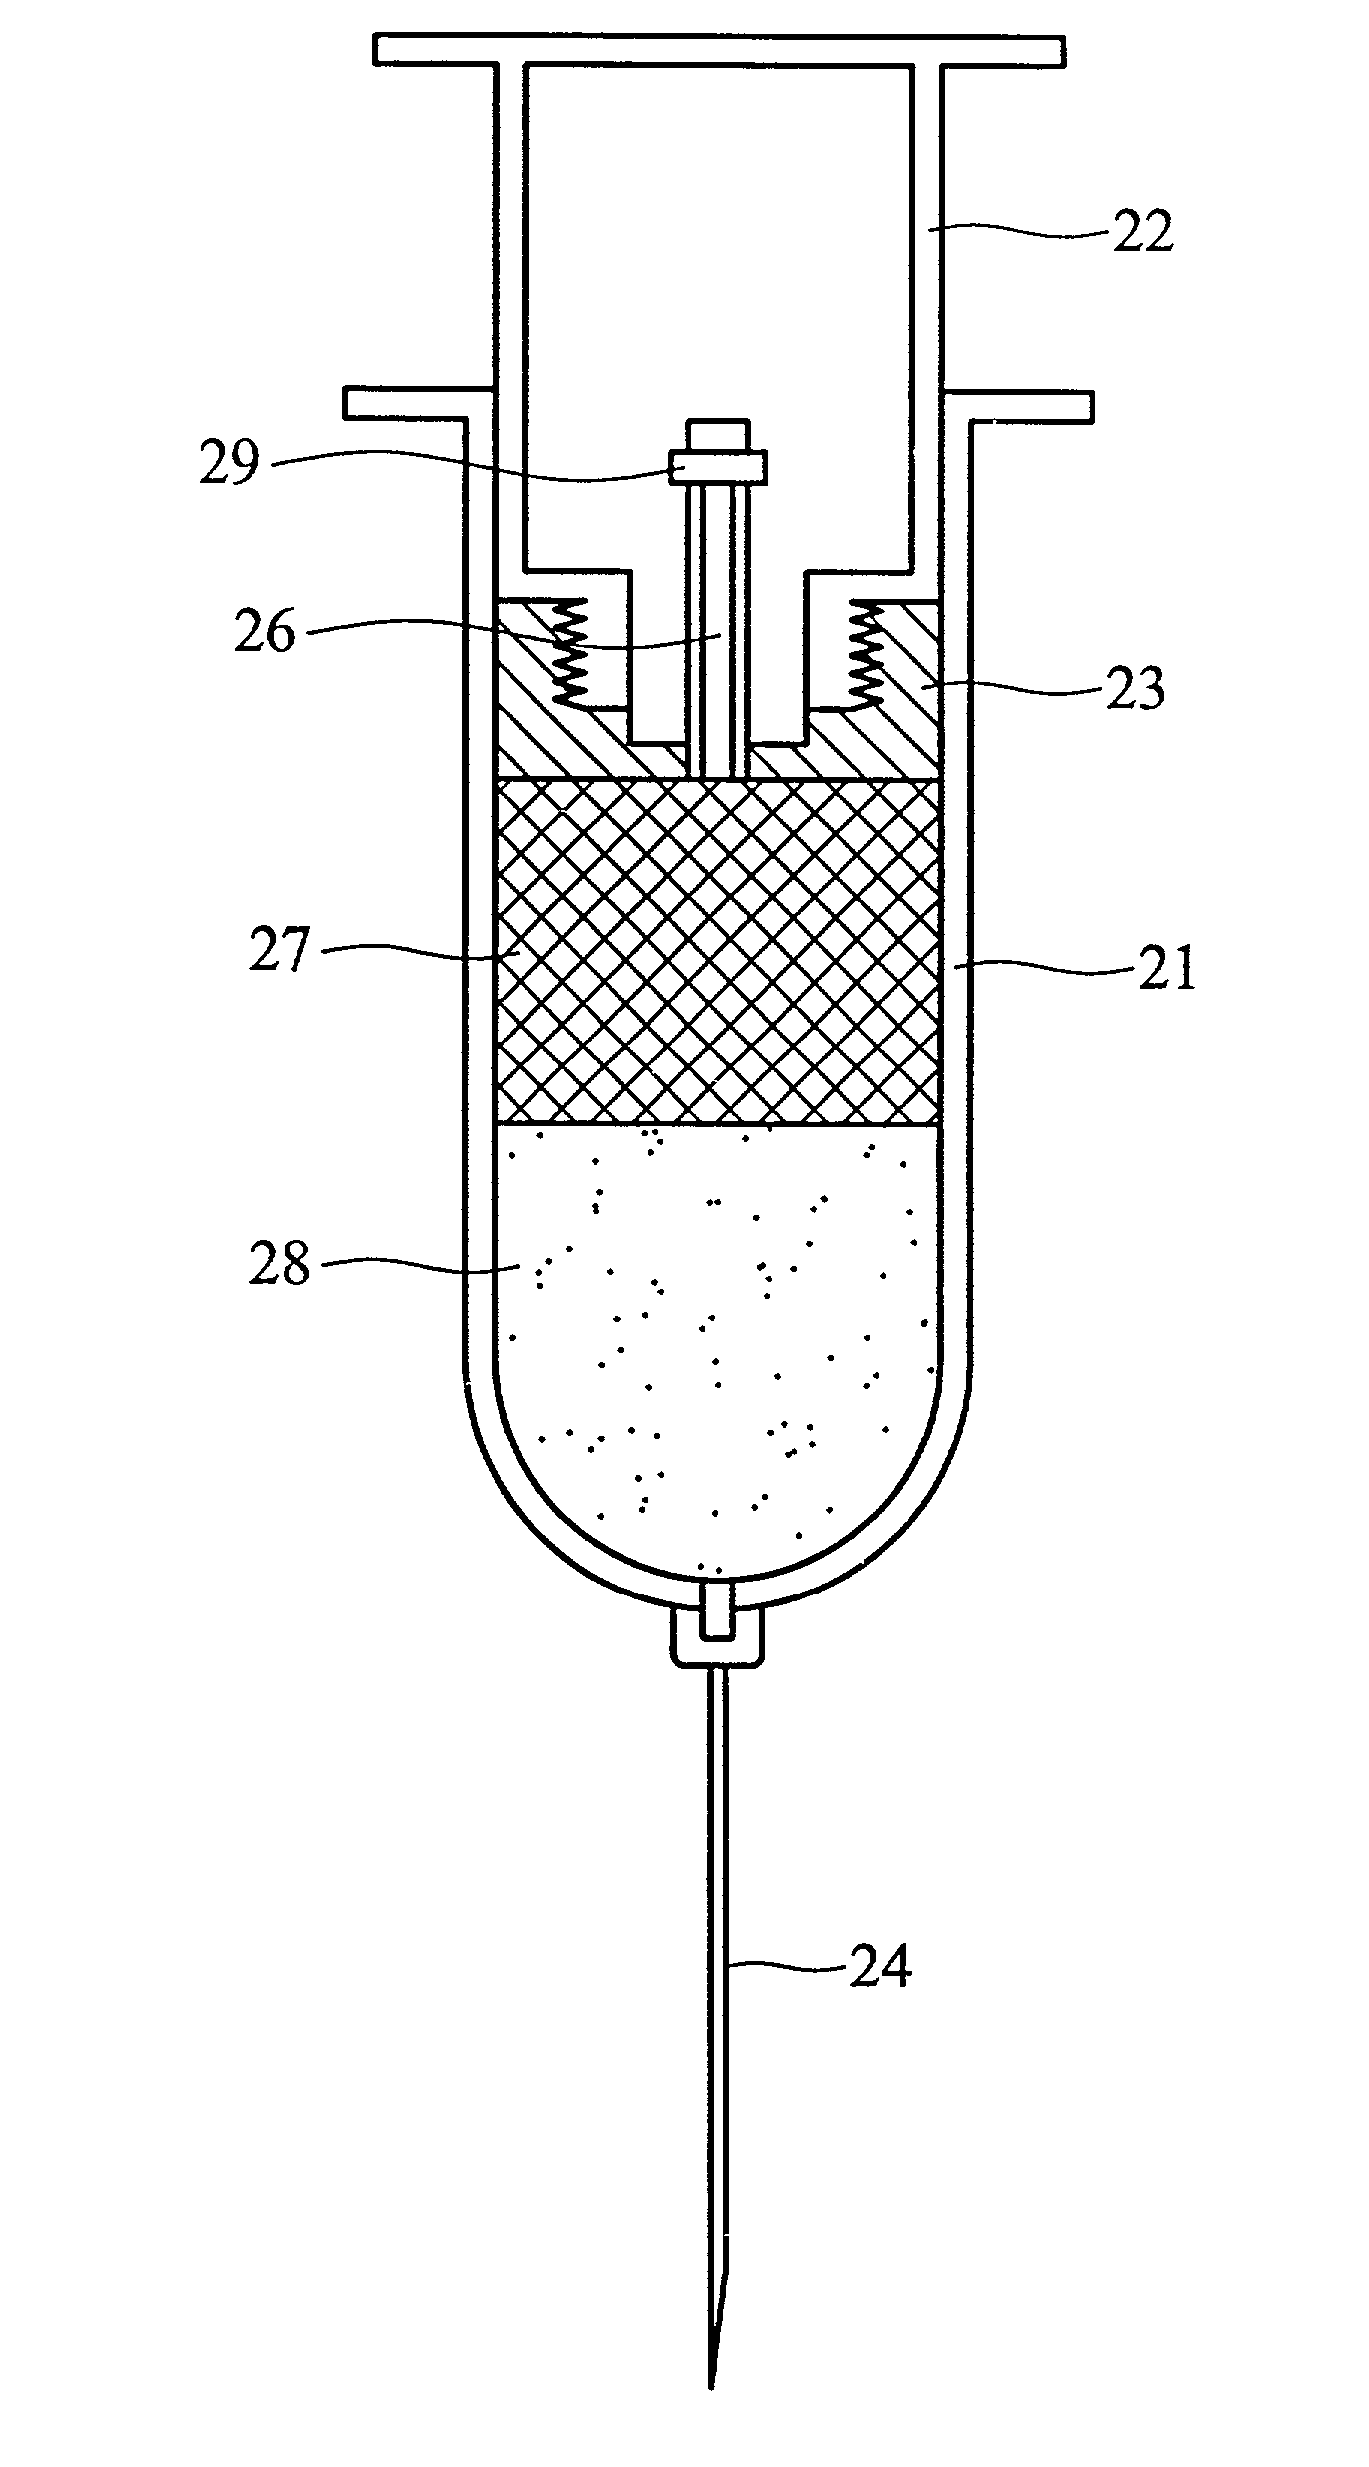 Method and apparatus for preparing and culturing cells